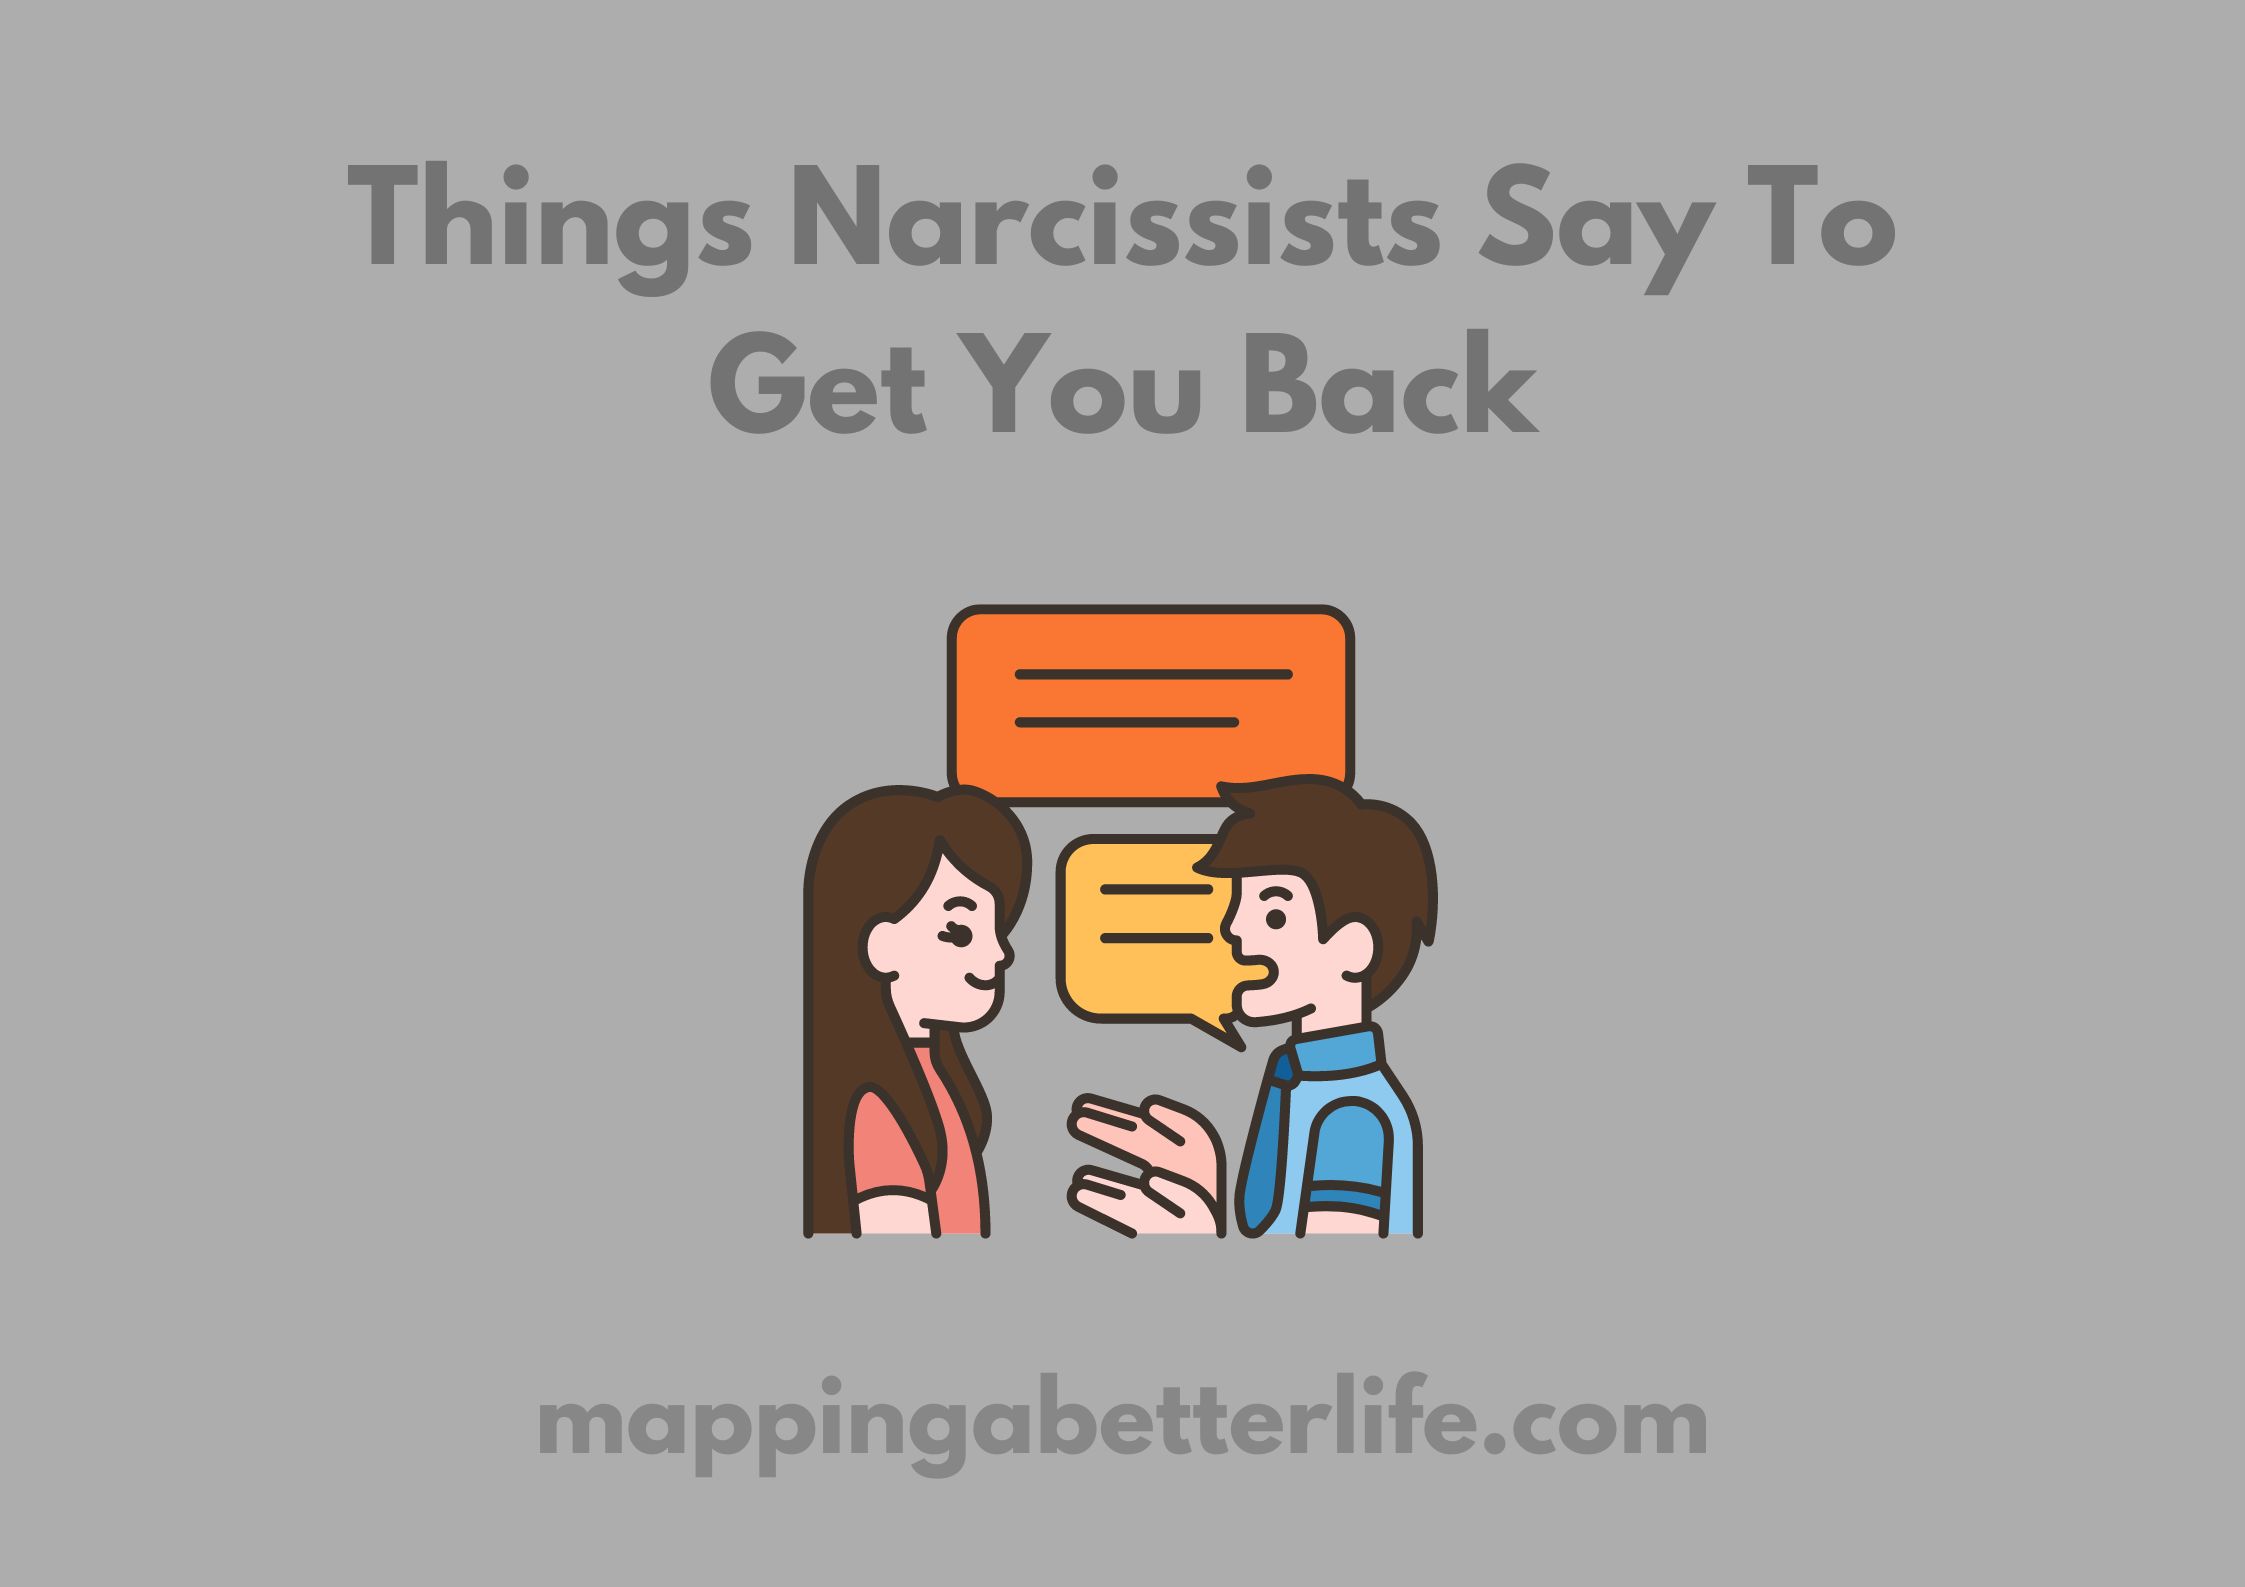 Things Narcissists Say To Get You Back